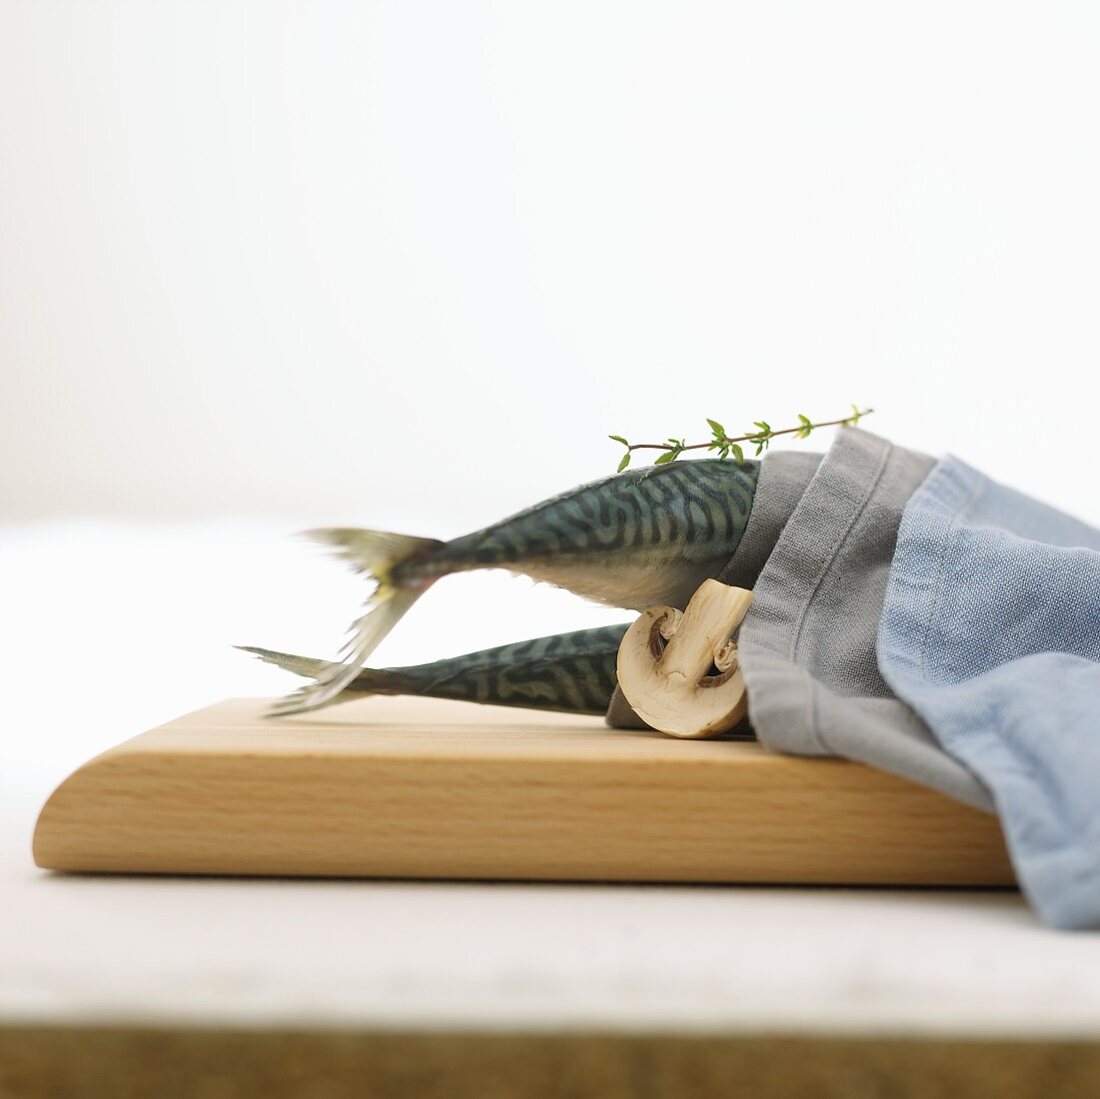 Two mackerel in a fabric napkin with mushroom and thyme